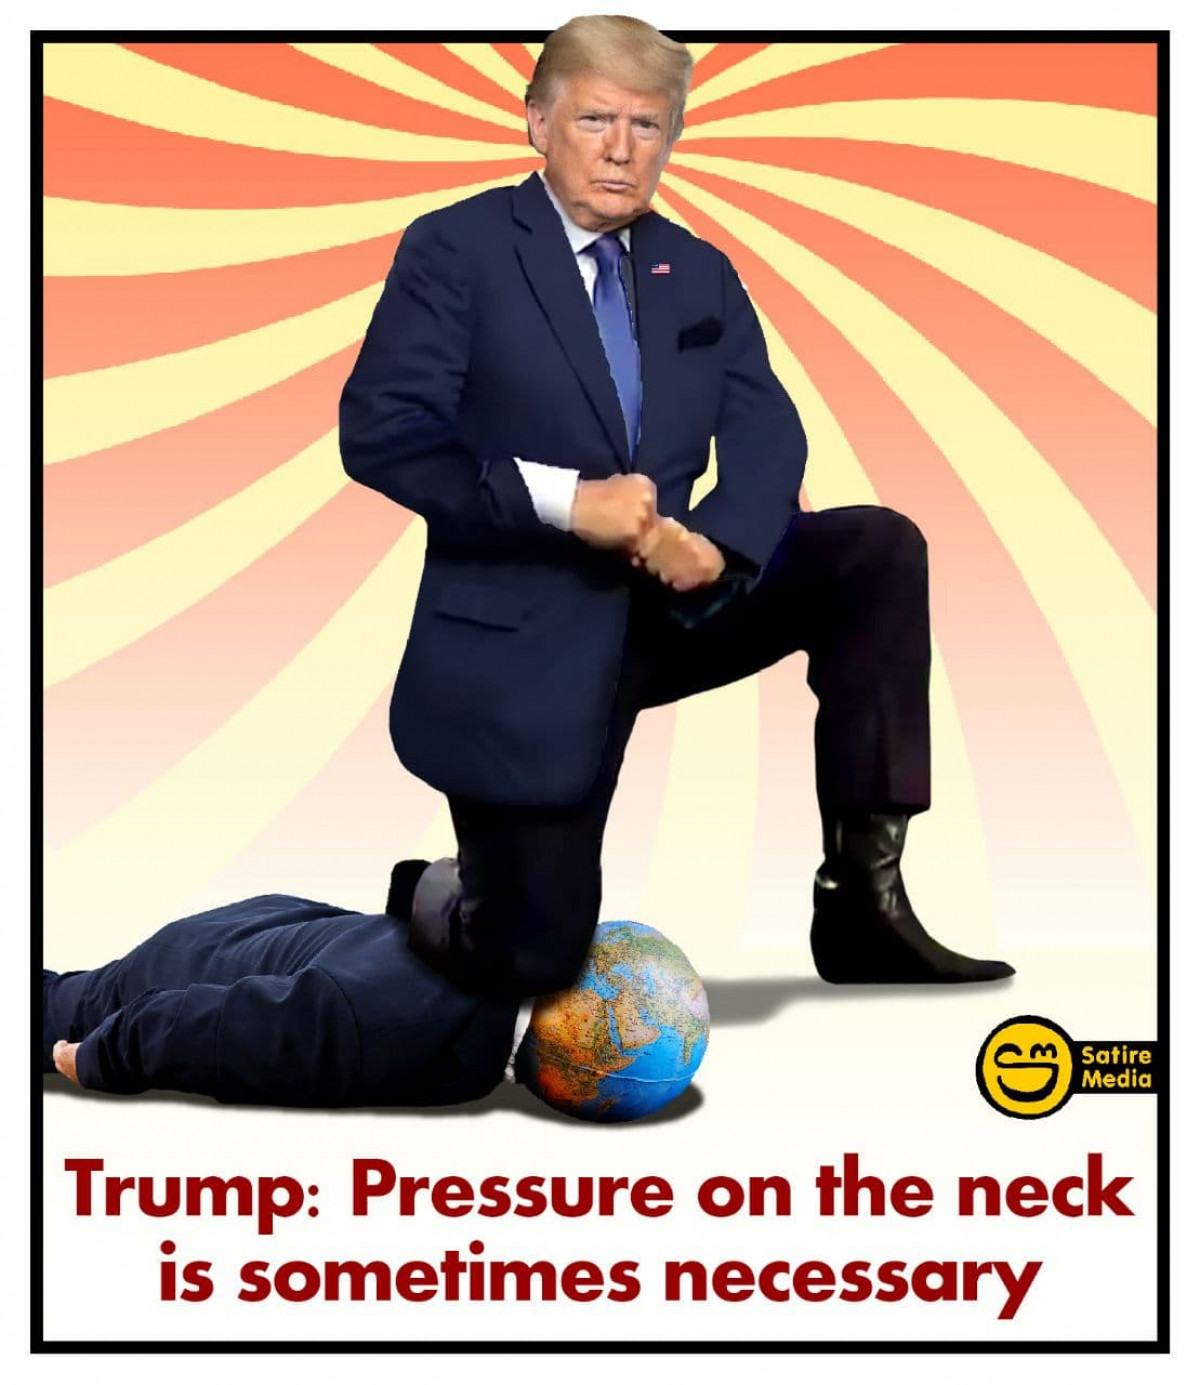 Trump: Pressure on the neck is sometimes necessary